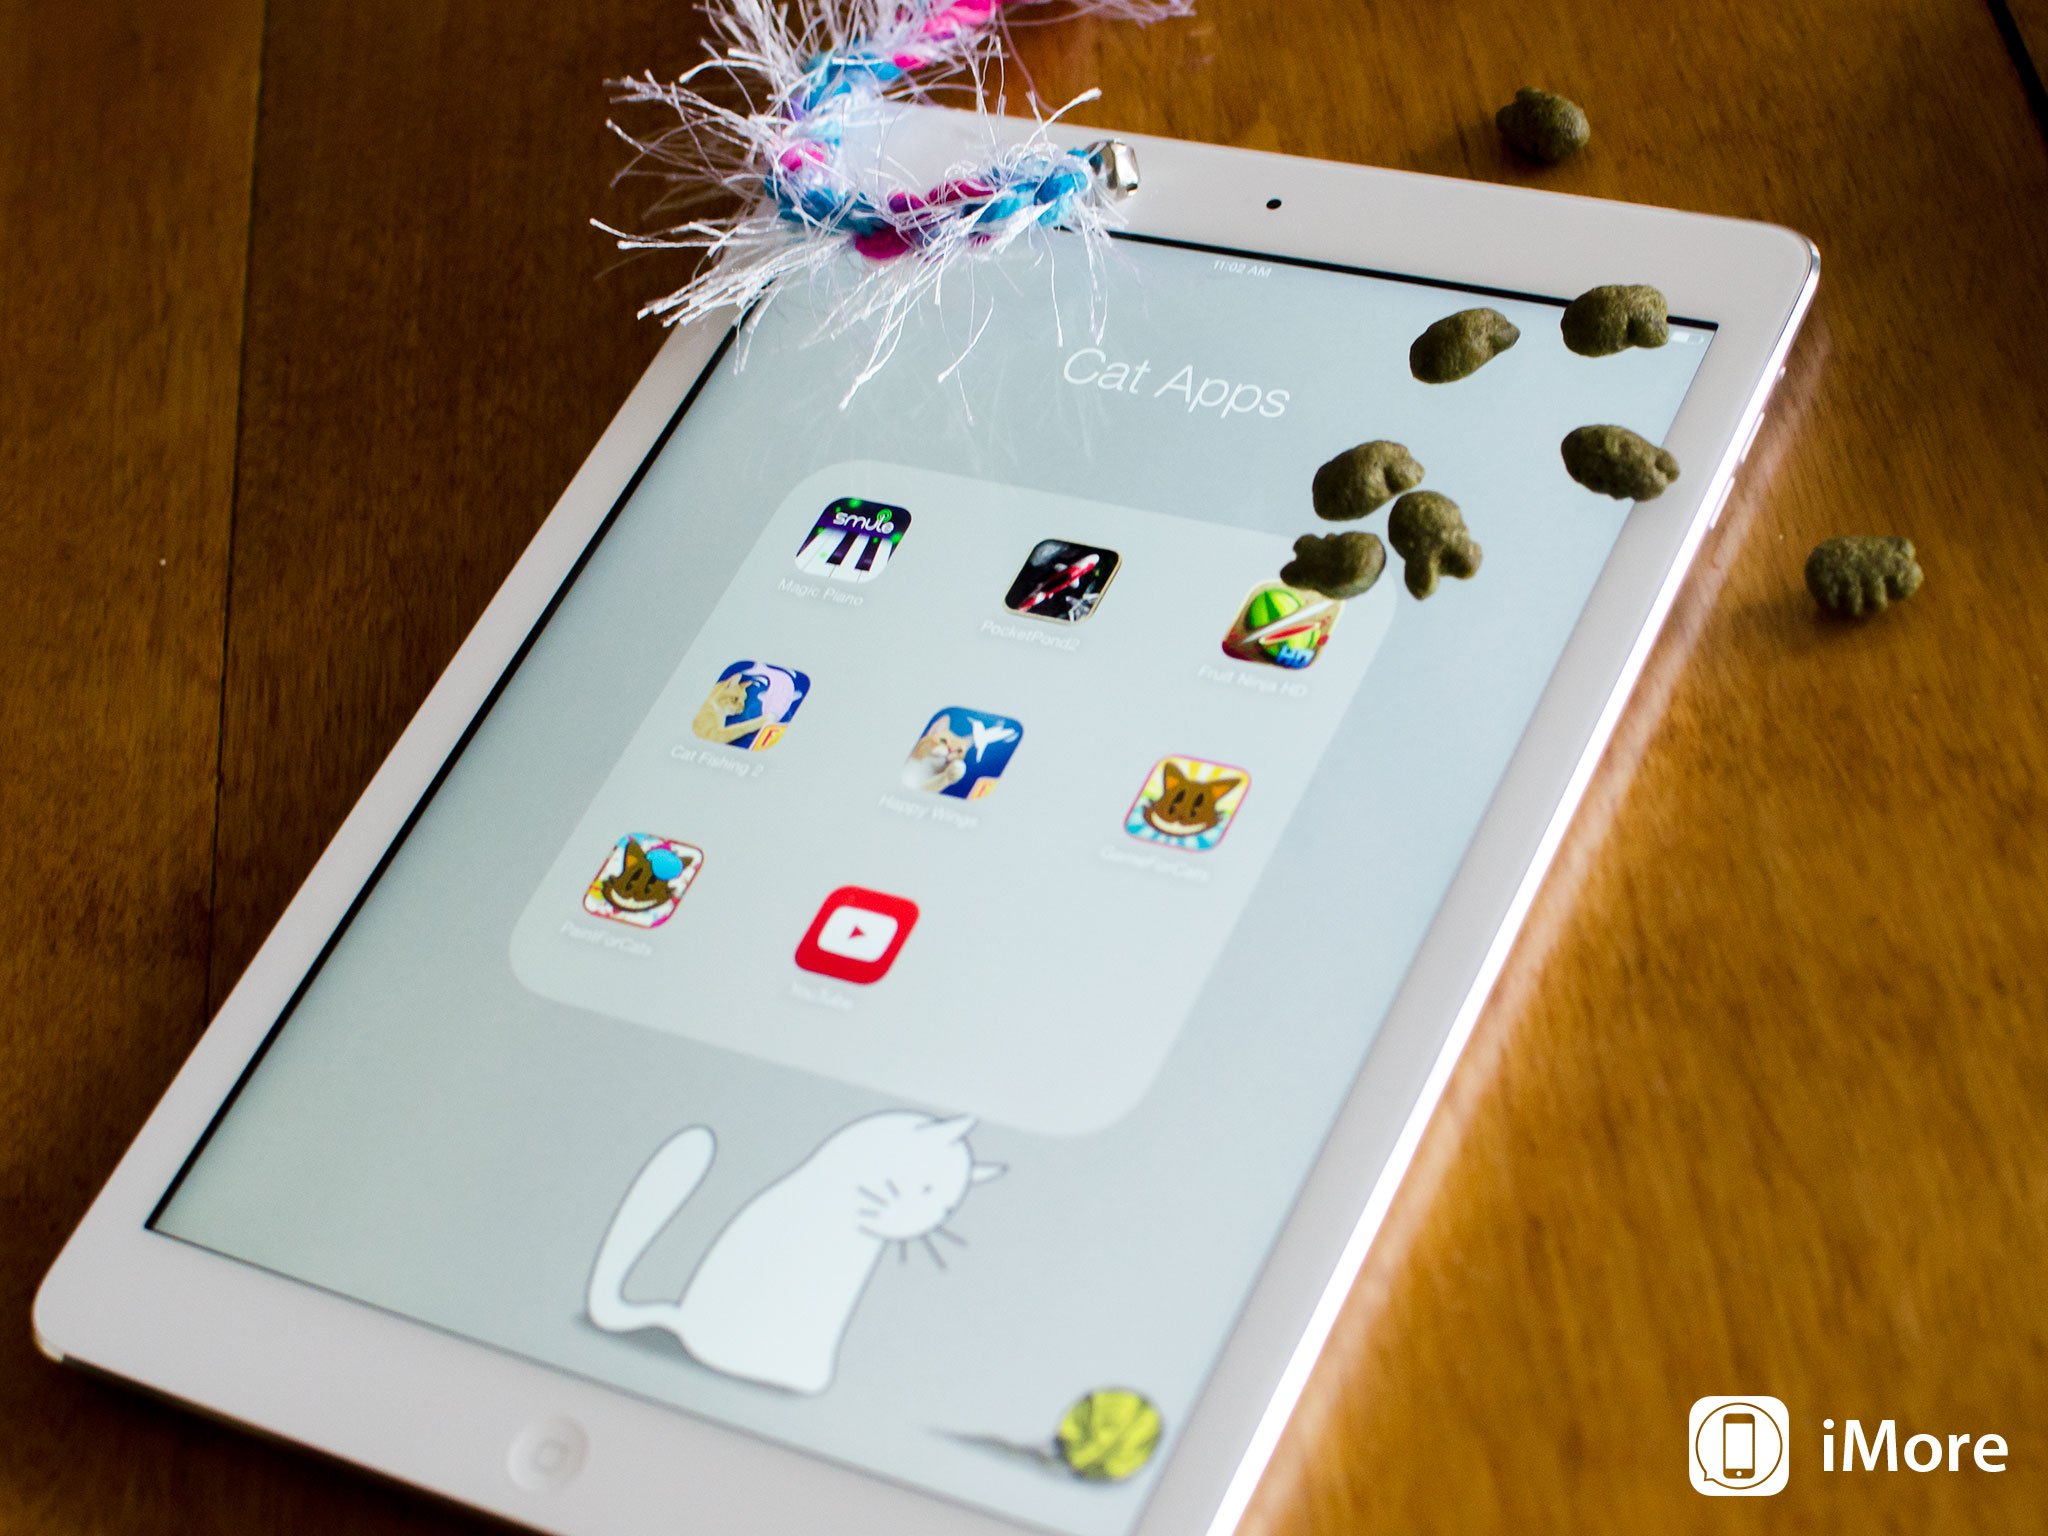 Best iPad apps for cats: Pocket Pond 2, Magic Piano, Paint for Cats, and more!